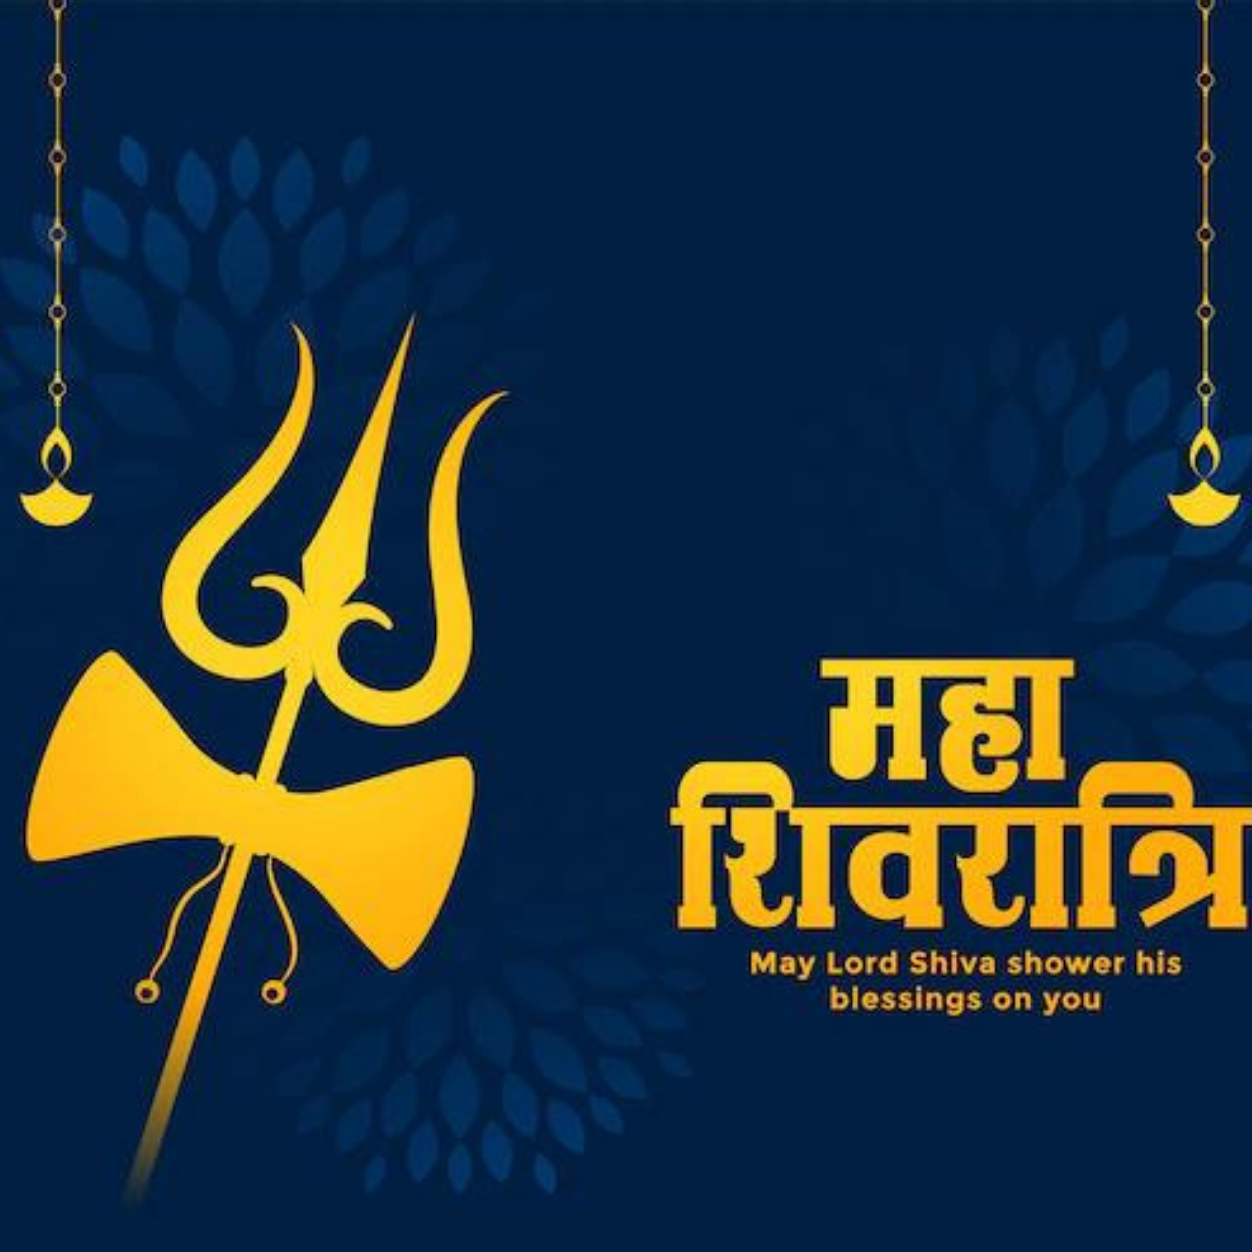 Download Maha shivratri indian festival greeting design - Hindu god shiva  for your mobile cell phone